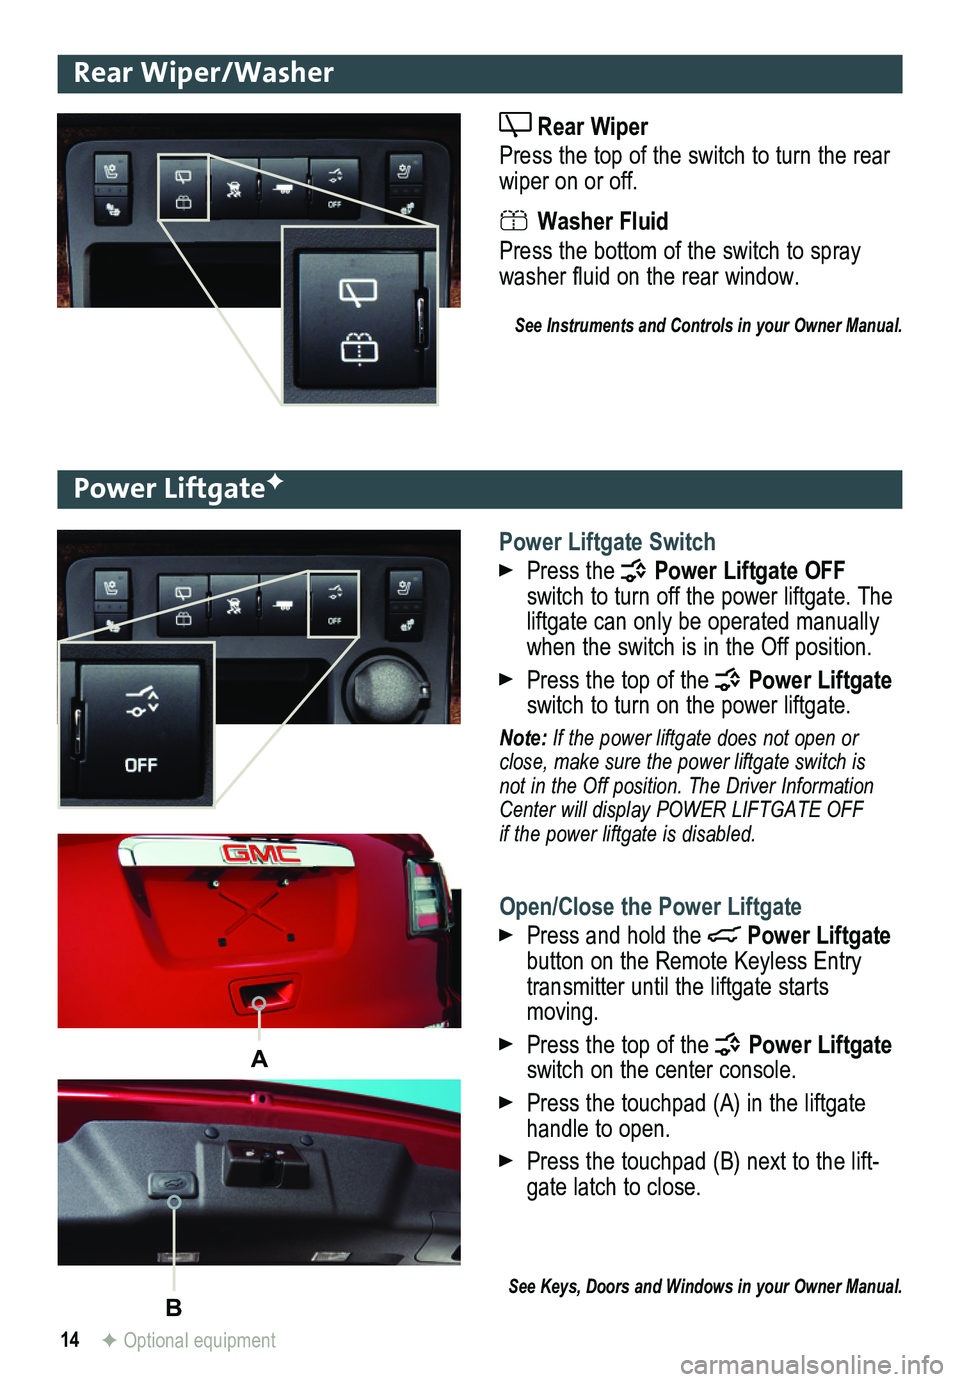 GMC ACADIA 2014  Get To Know Guide 14
Rear Wiper/Washer
 Rear Wiper 
Press the top of the switch to turn the rear wiper on or off.
 Washer Fluid 
Press the bottom of the switch to spray washer fluid on the rear window. 
See Instruments